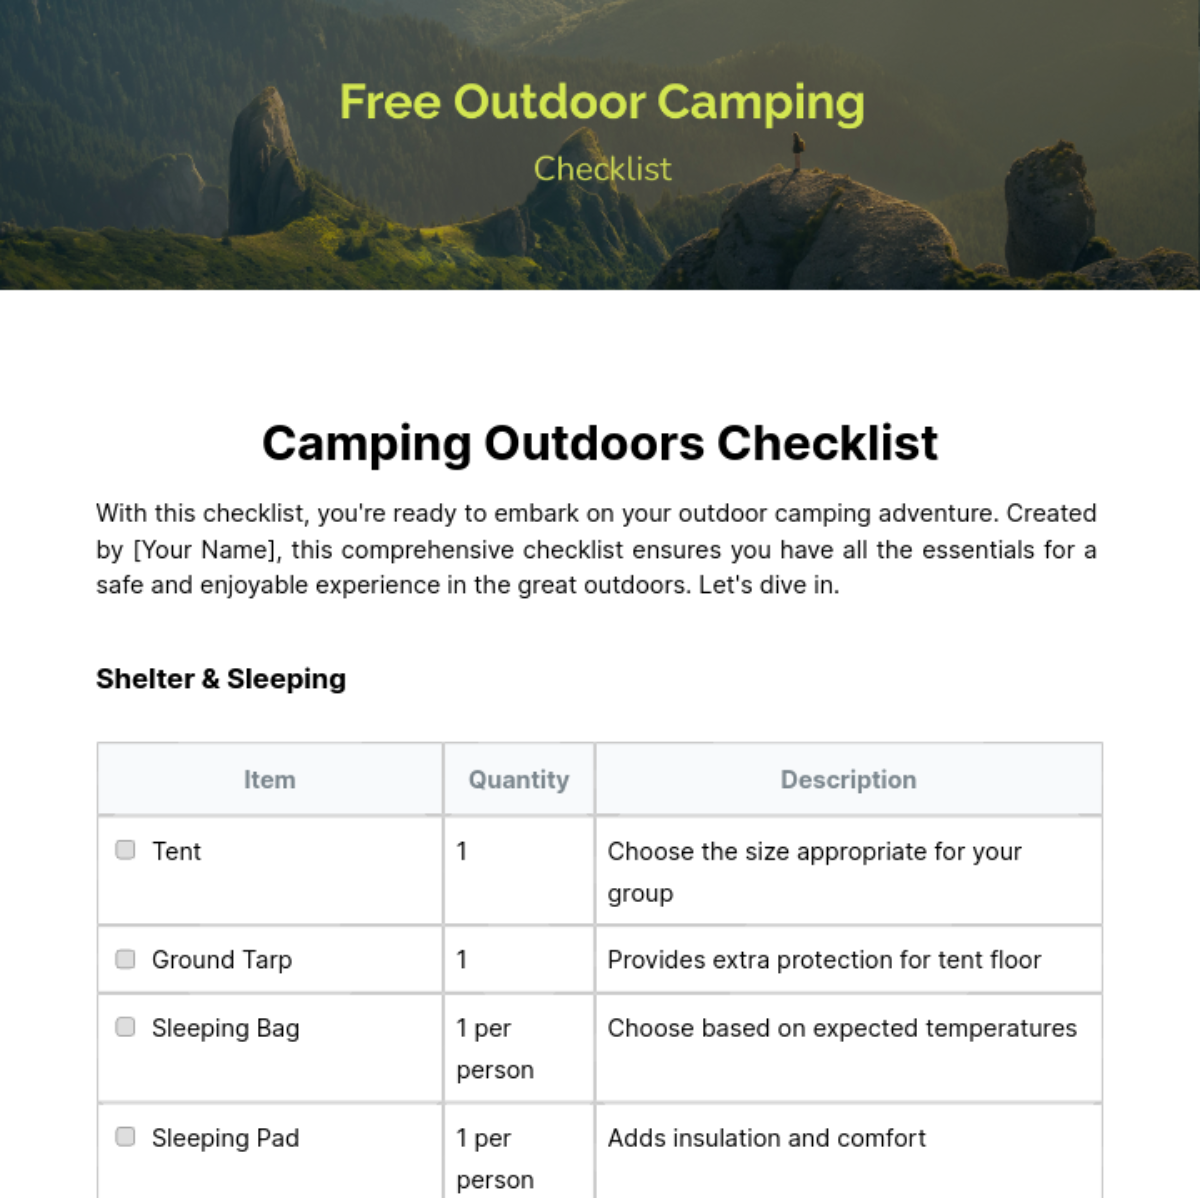 Free Outdoor Camping Checklist Template